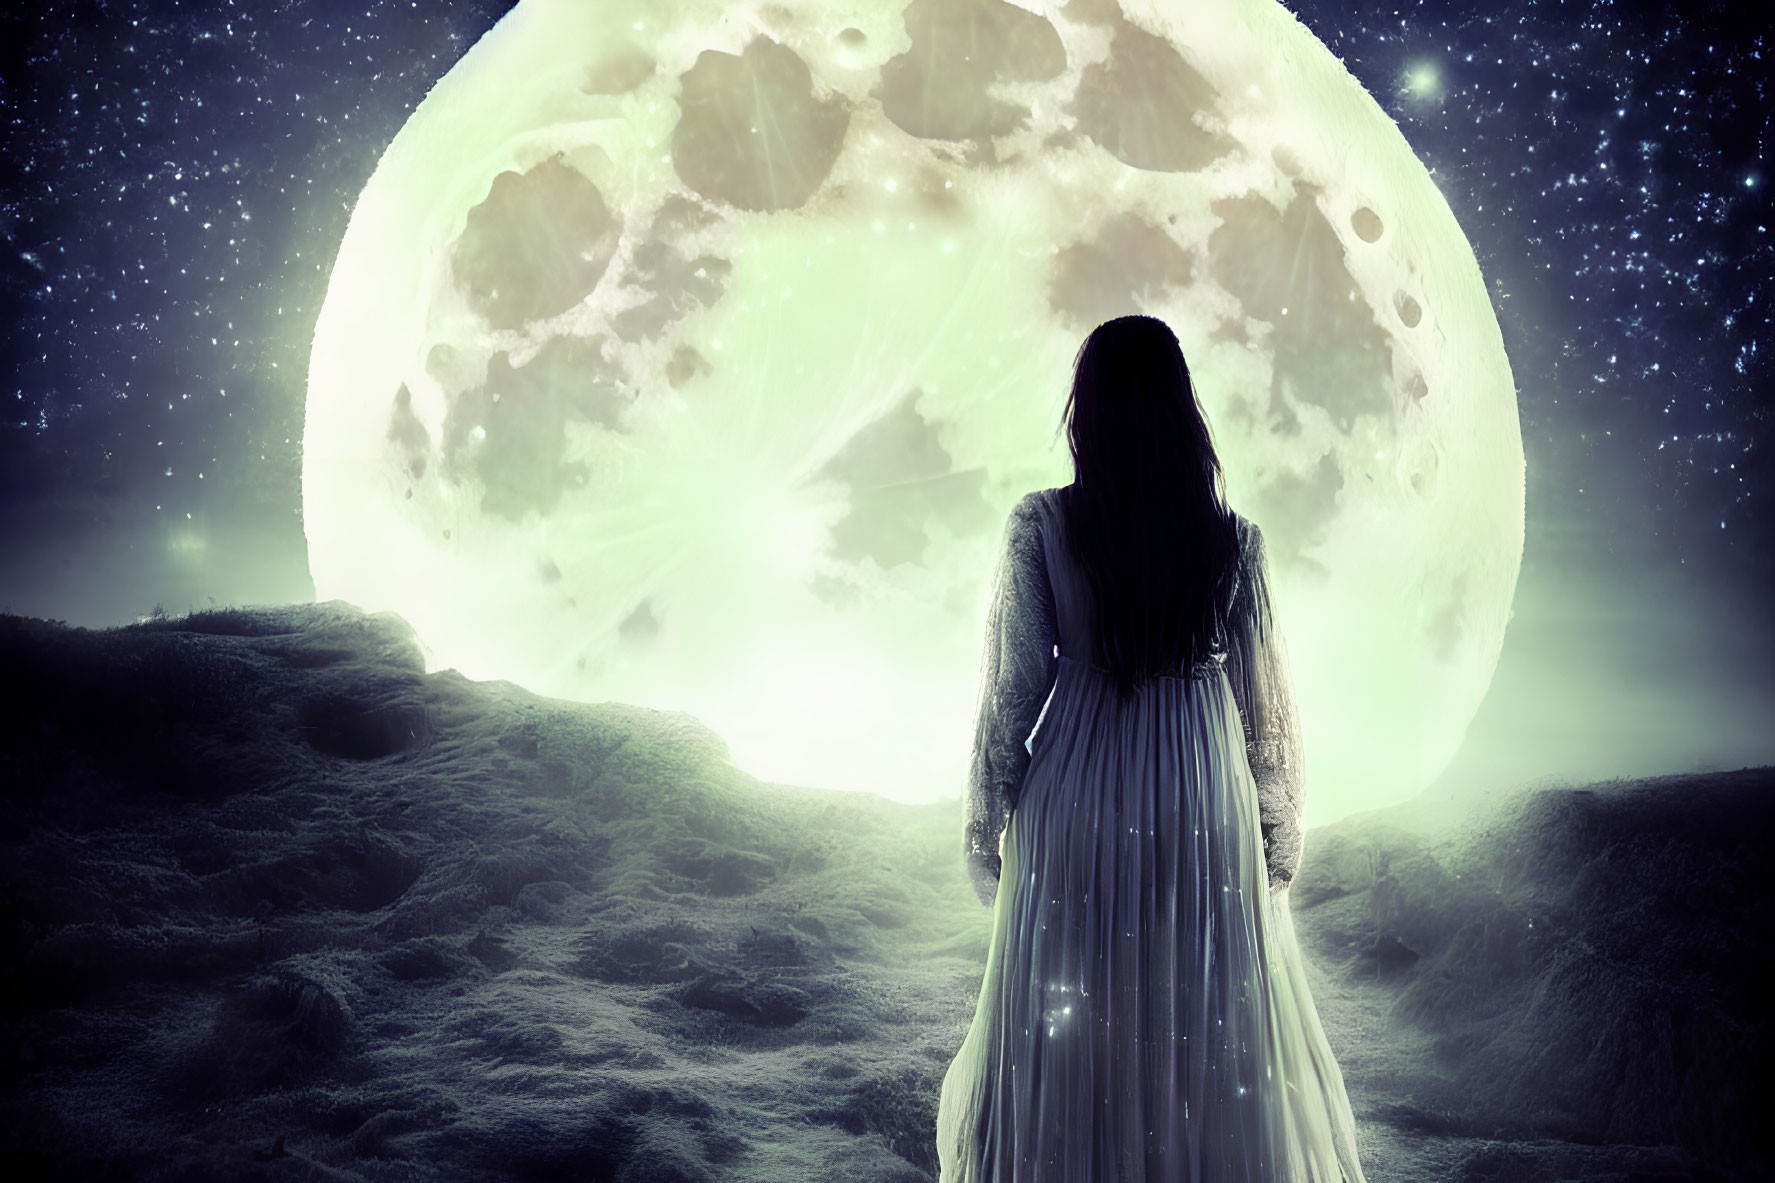 Woman in white dress on moon-like surface under vivid moon.